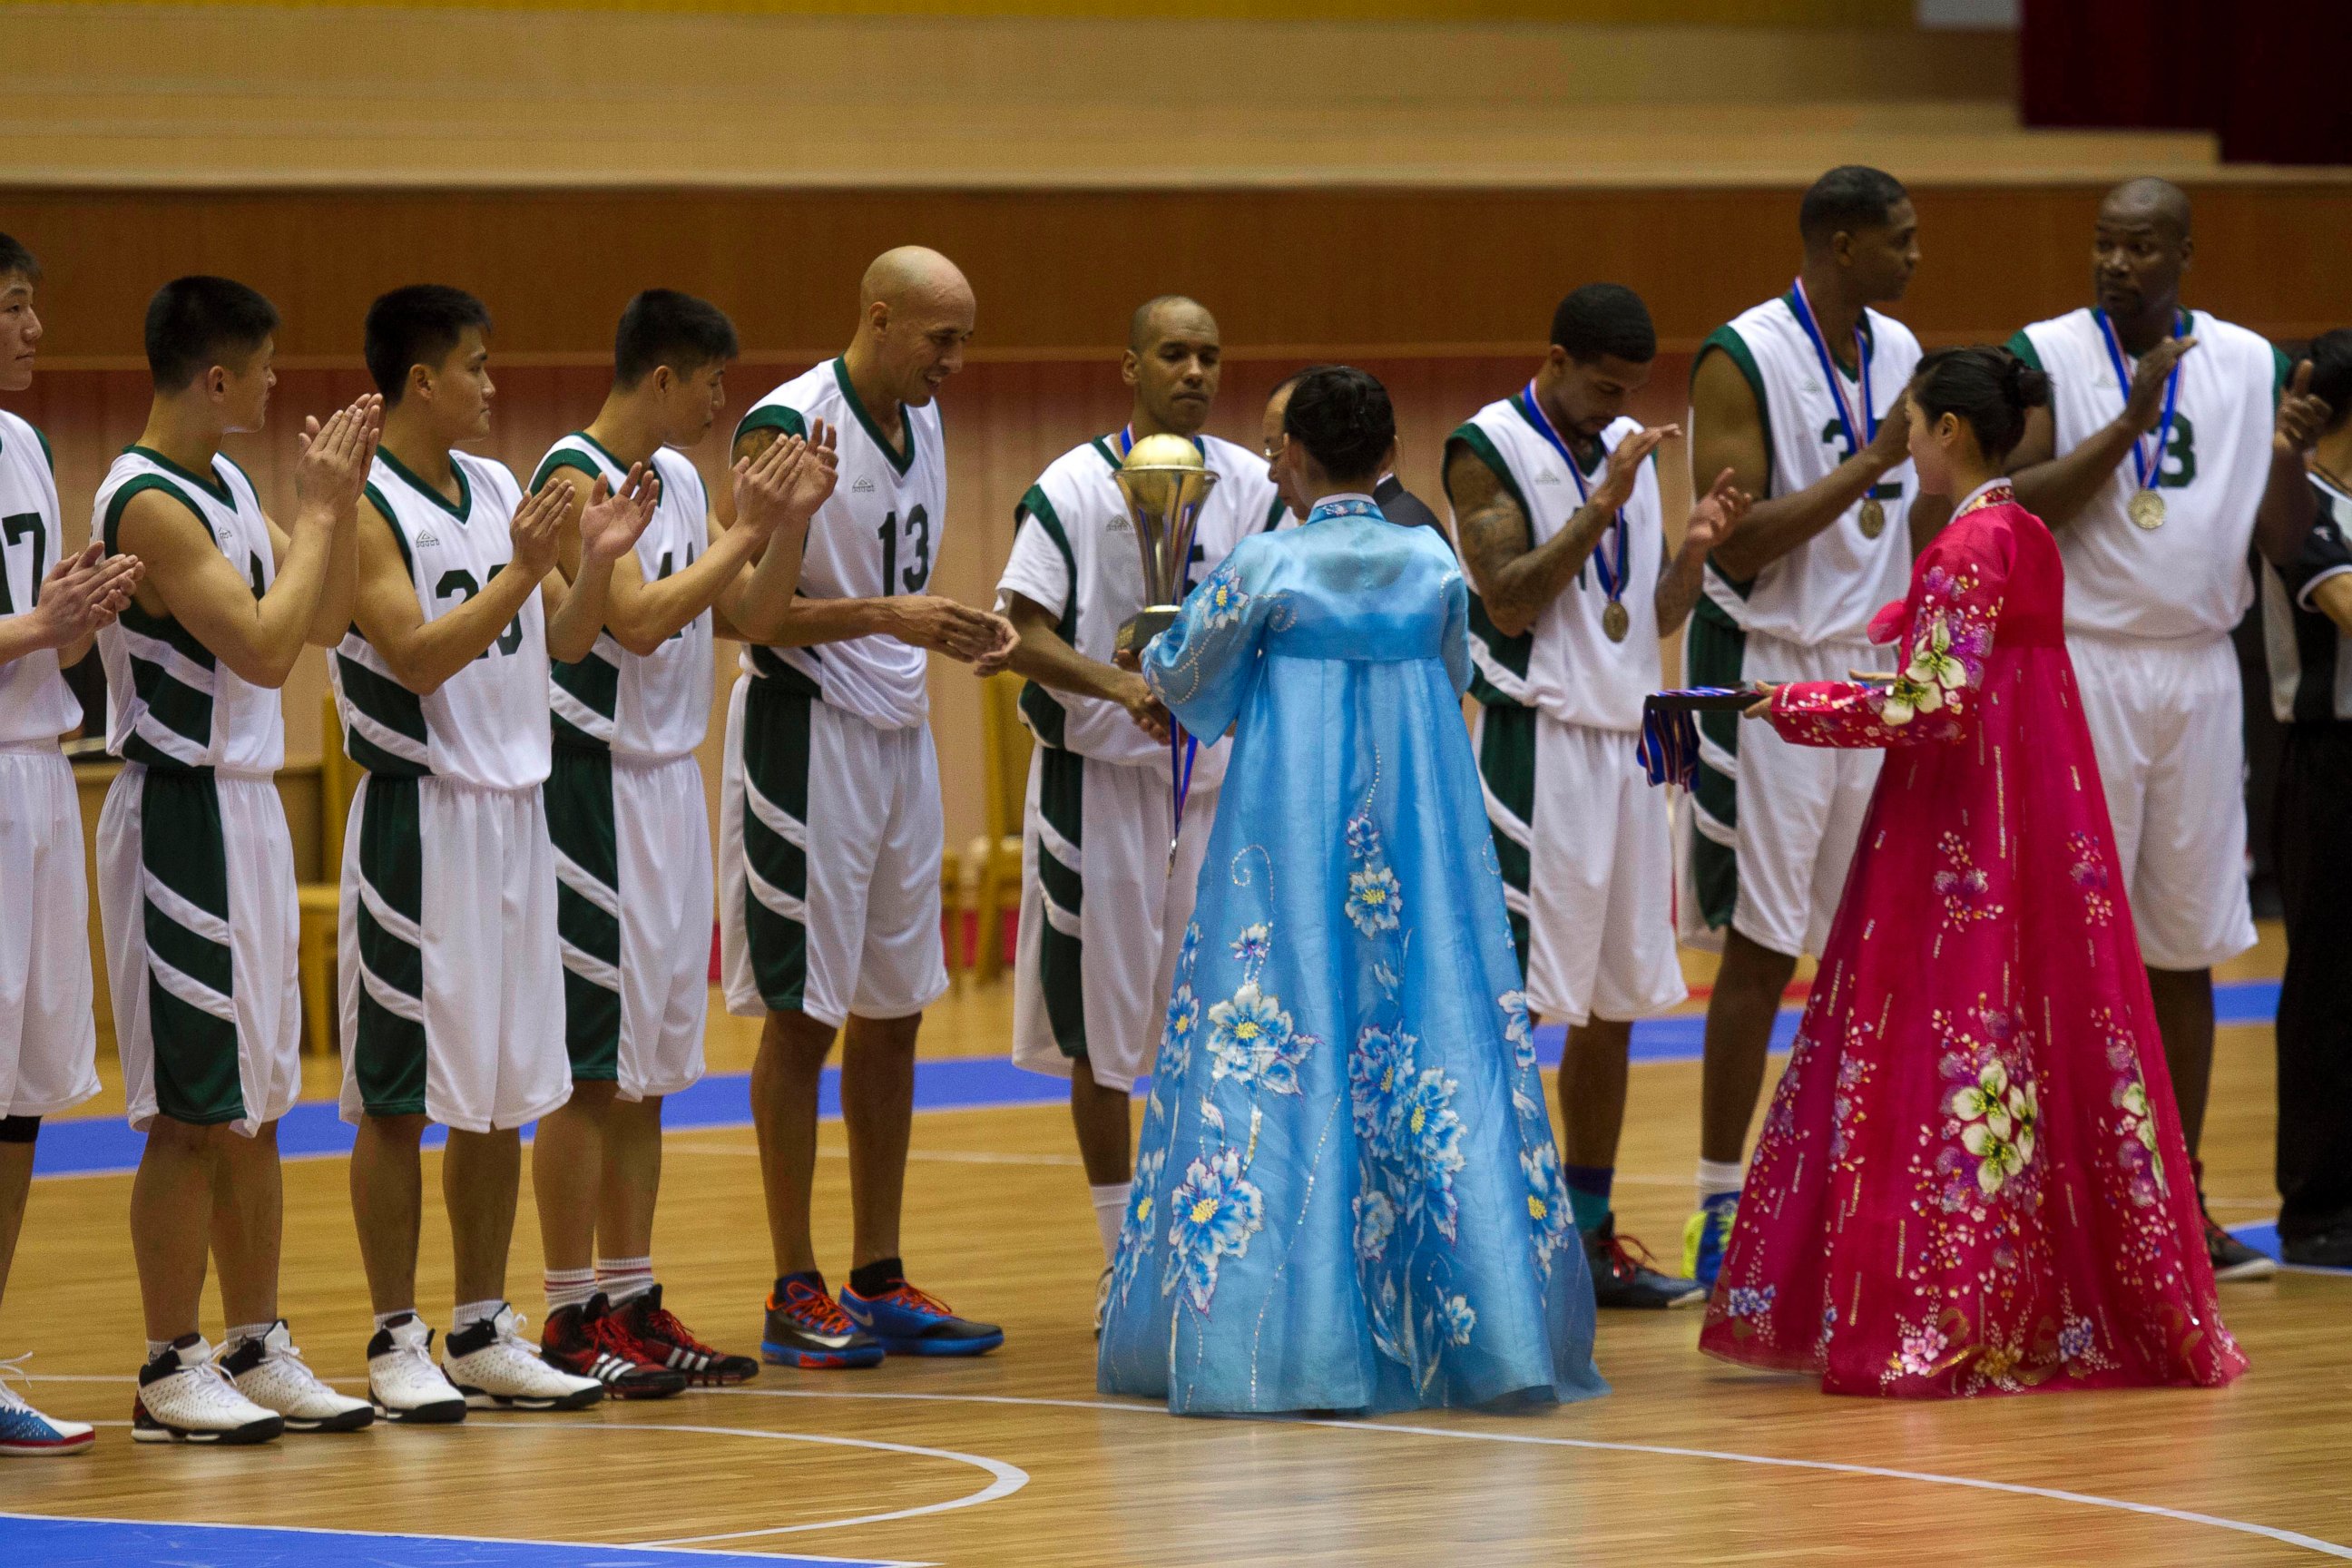 PHOTO: U.S. basketball player Doug Christie is handed a trophy as North Korean players applaud at the end of an exhibition basketball game at an indoor stadium in Pyongyang, North Korea on Jan. 8, 2014. 